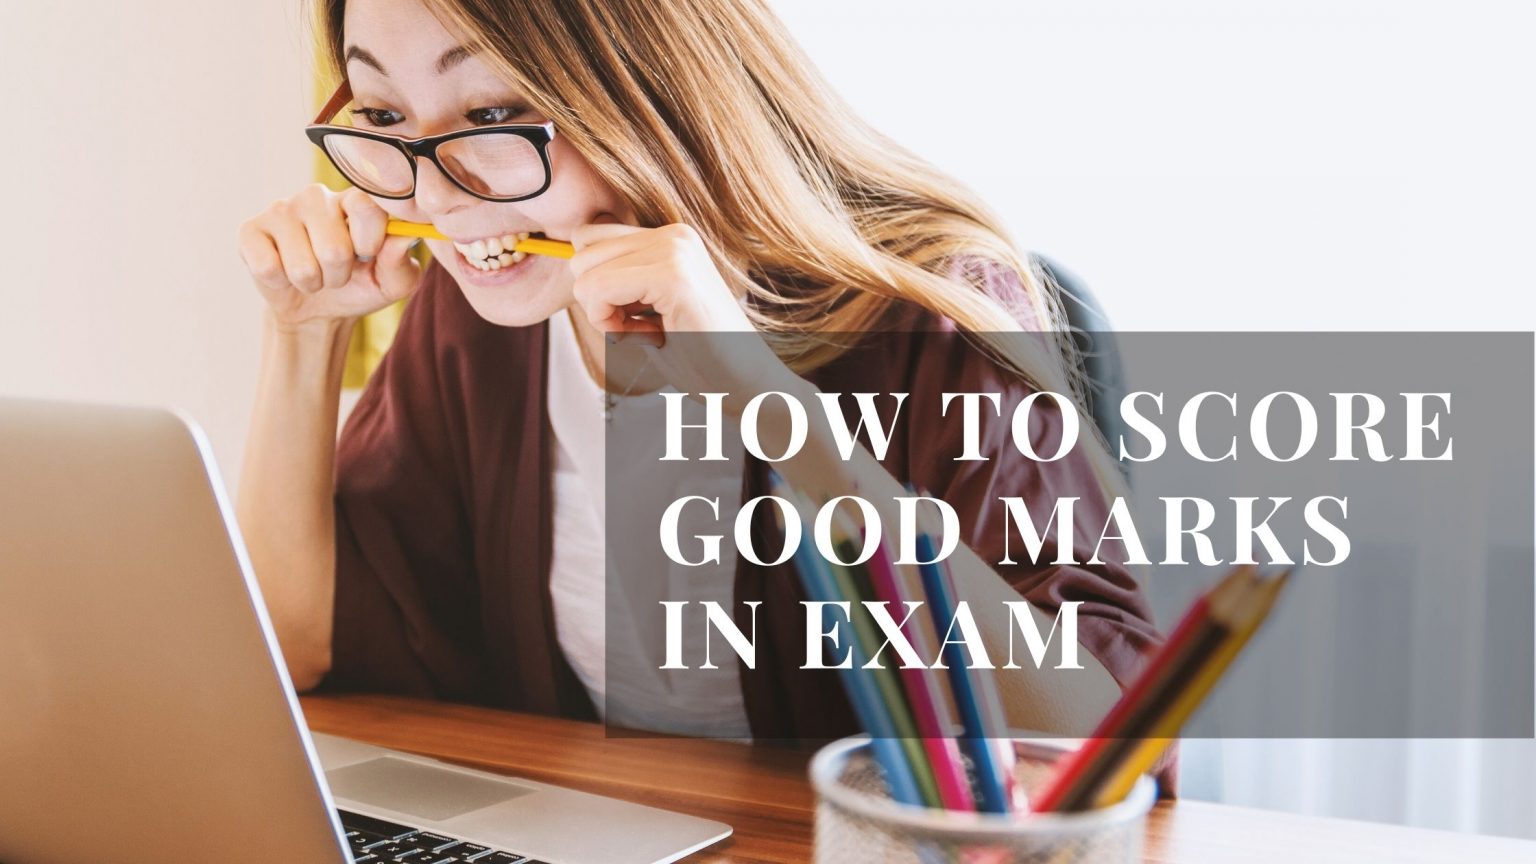 how-to-score-good-marks-in-exams-the-tuition-teacher-official-blog